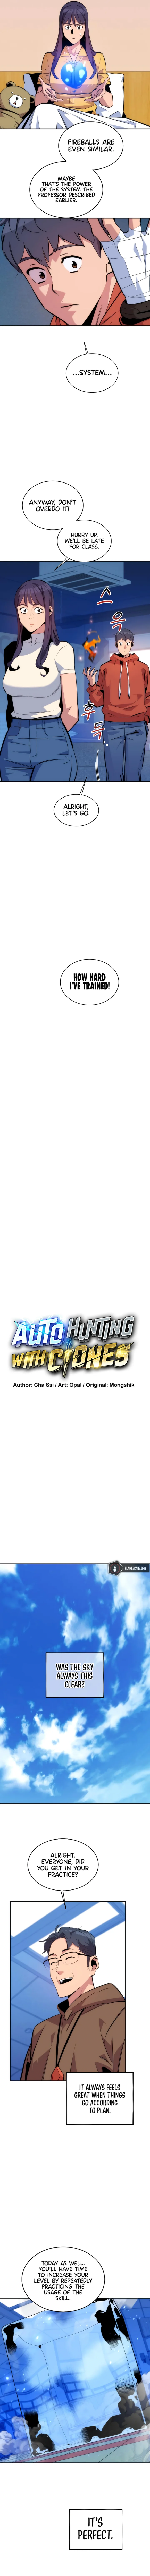 Auto-Hunting With Clones - Chapter 54 Page 2